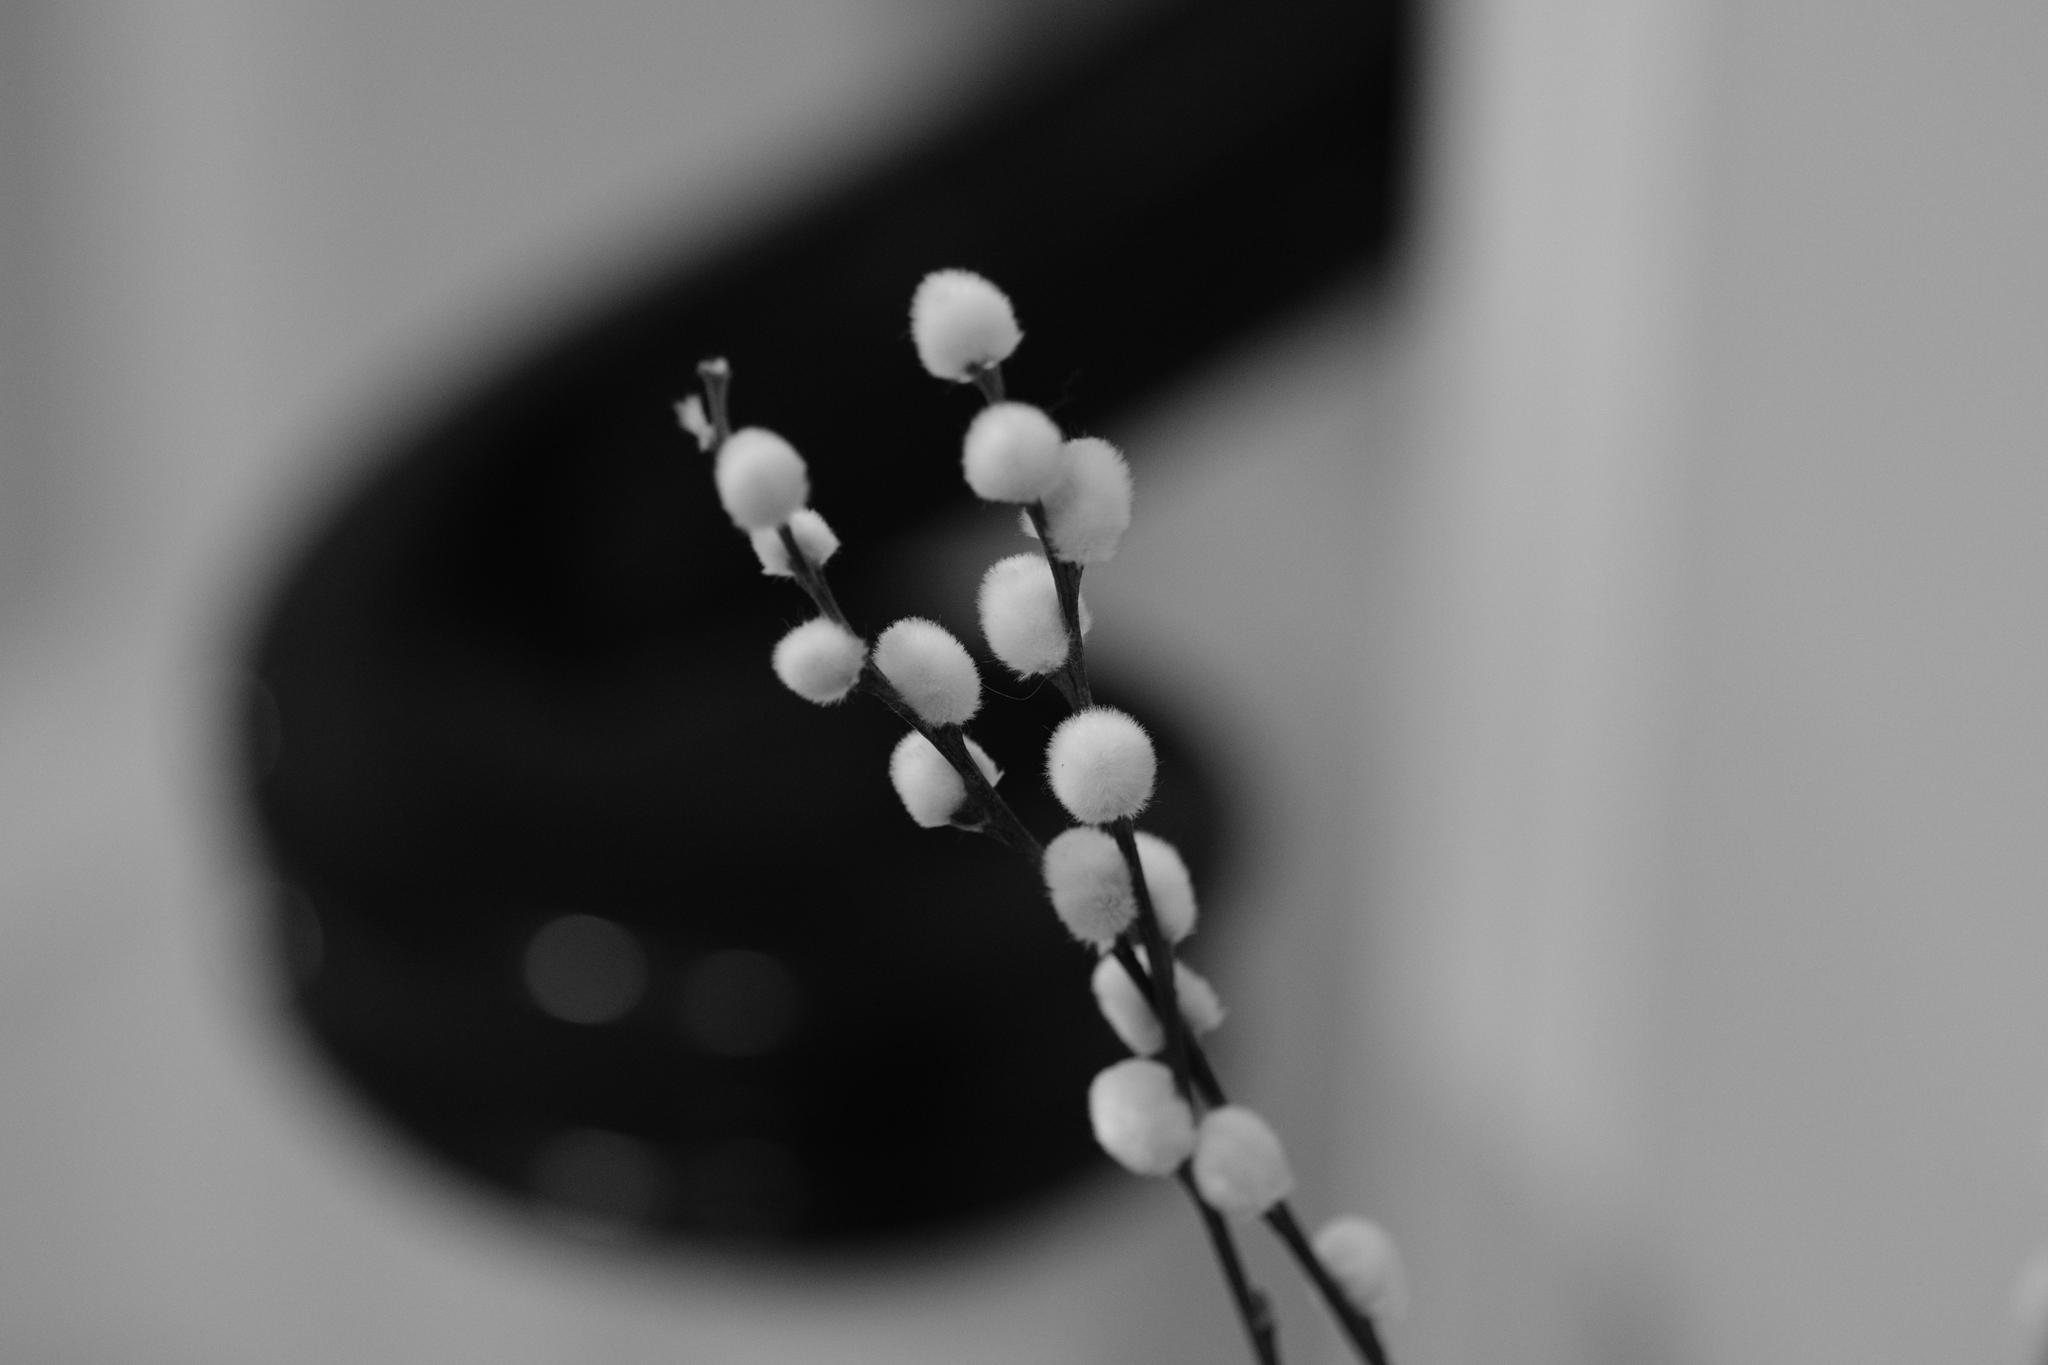 A black and white photo capturing a close-up of a plant with small round berries, with a blurred background